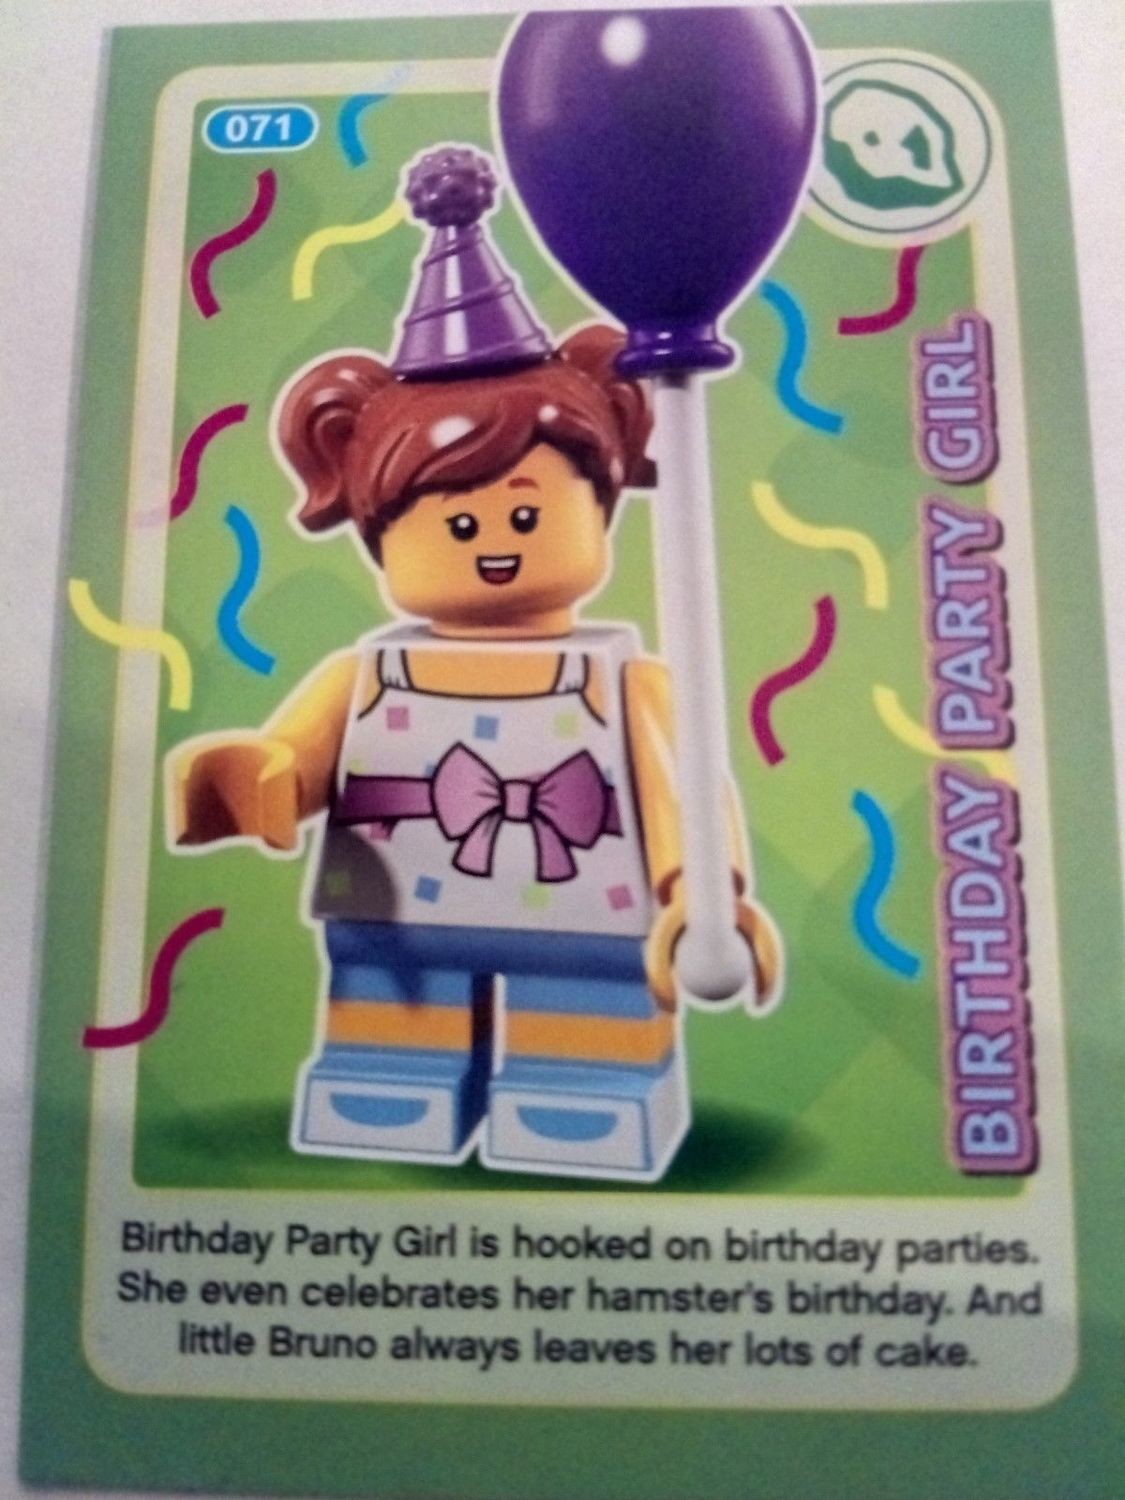 Birthday Party Girl Sainsburys Lego Incredible Inventions 2018 Card 0071